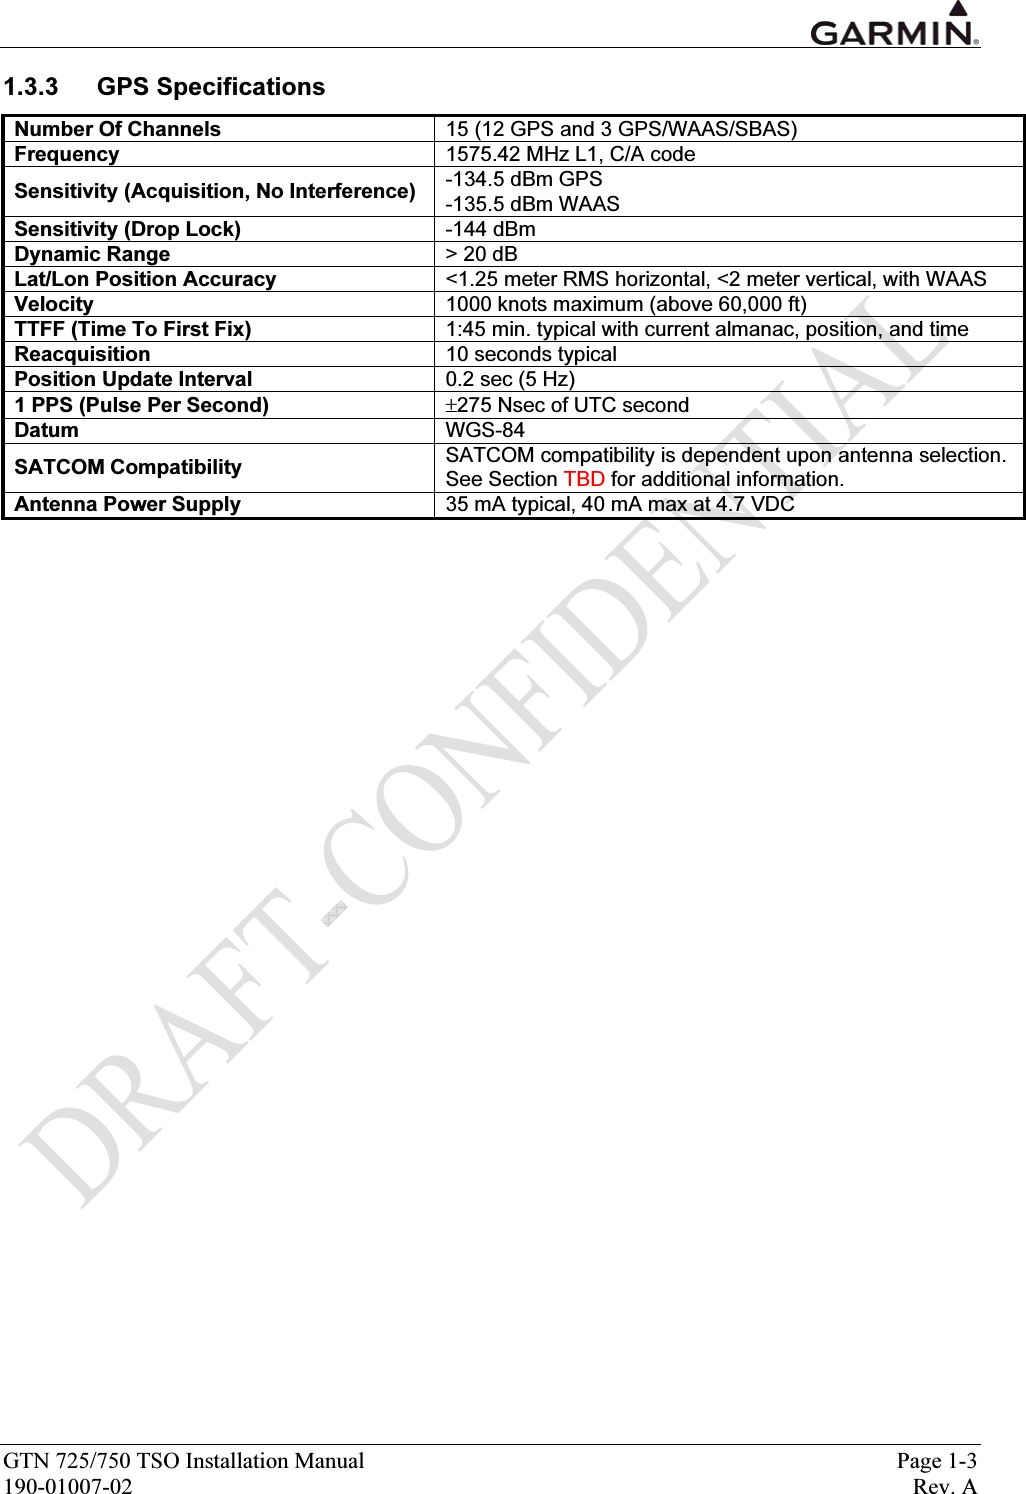  GTN 725/750 TSO Installation Manual  Page 1-3 190-01007-02  Rev. A 1.3.3 GPS Specifications Number Of Channels  15 (12 GPS and 3 GPS/WAAS/SBAS) Frequency  1575.42 MHz L1, C/A code -134.5 dBm GPS Sensitivity (Acquisition, No Interference)  -135.5 dBm WAAS Sensitivity (Drop Lock)  -144 dBm Dynamic Range  &gt; 20 dB Lat/Lon Position Accuracy  &lt;1.25 meter RMS horizontal, &lt;2 meter vertical, with WAAS Velocity  1000 knots maximum (above 60,000 ft) TTFF (Time To First Fix)  1:45 min. typical with current almanac, position, and time Reacquisition  10 seconds typical Position Update Interval  0.2 sec (5 Hz) 1 PPS (Pulse Per Second)  ±275 Nsec of UTC second Datum  WGS-84 SATCOM Compatibility  SATCOM compatibility is dependent upon antenna selection. See Section TBD for additional information. Antenna Power Supply  35 mA typical, 40 mA max at 4.7 VDC  